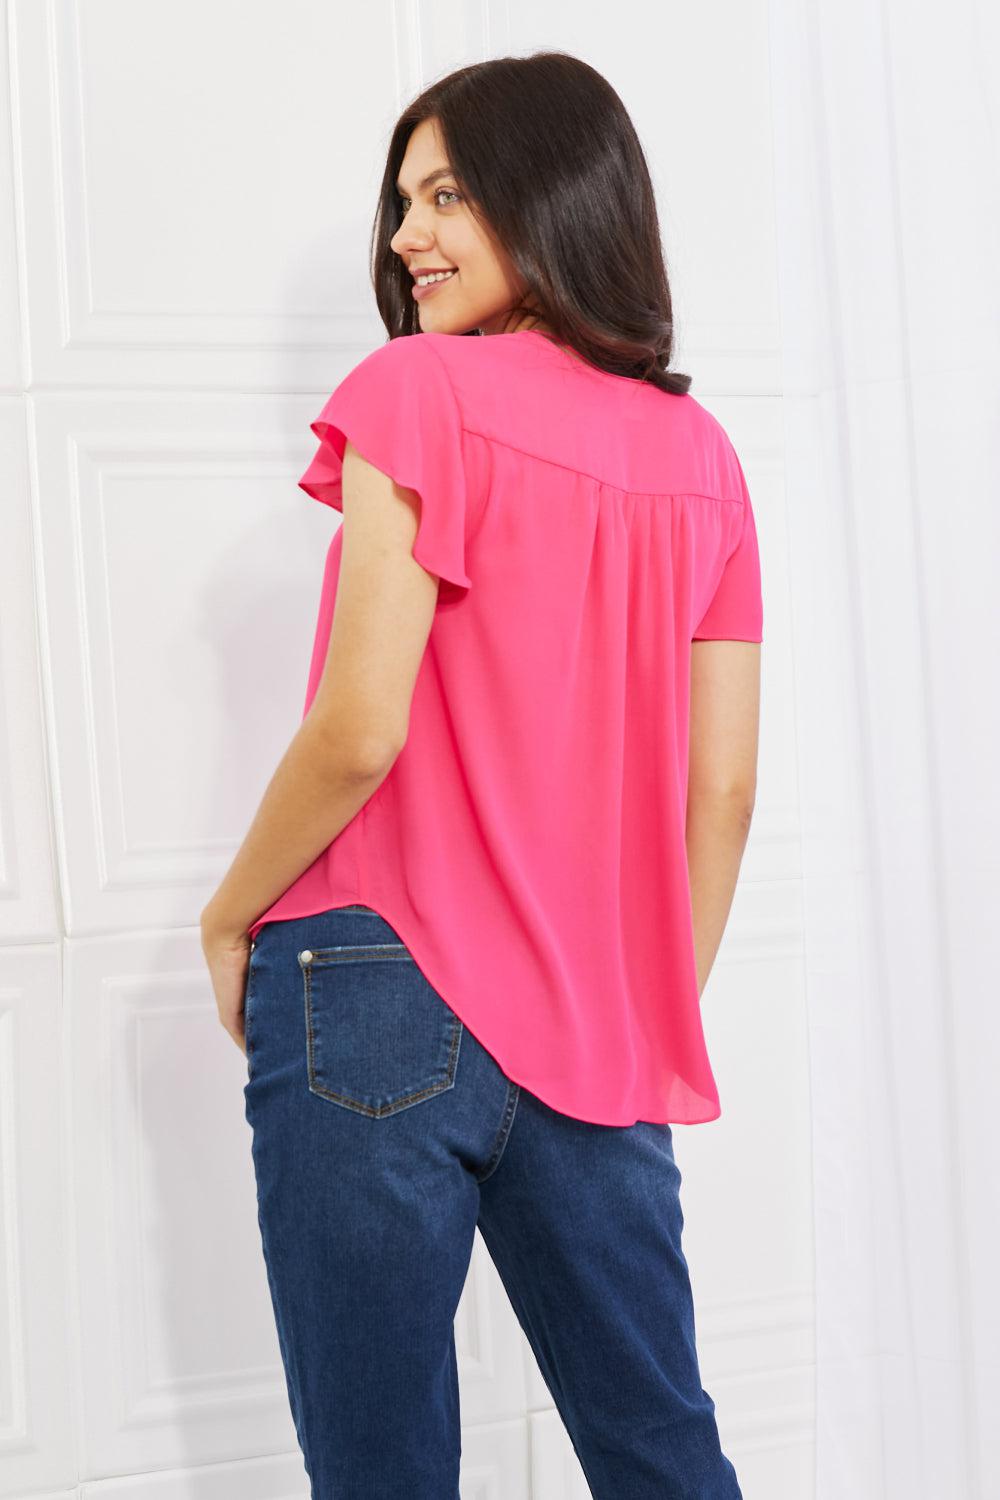 Sew In Love Just For You Full Size Short Ruffled sleeve length Top in Hot Pink BLUE ZONE PLANET